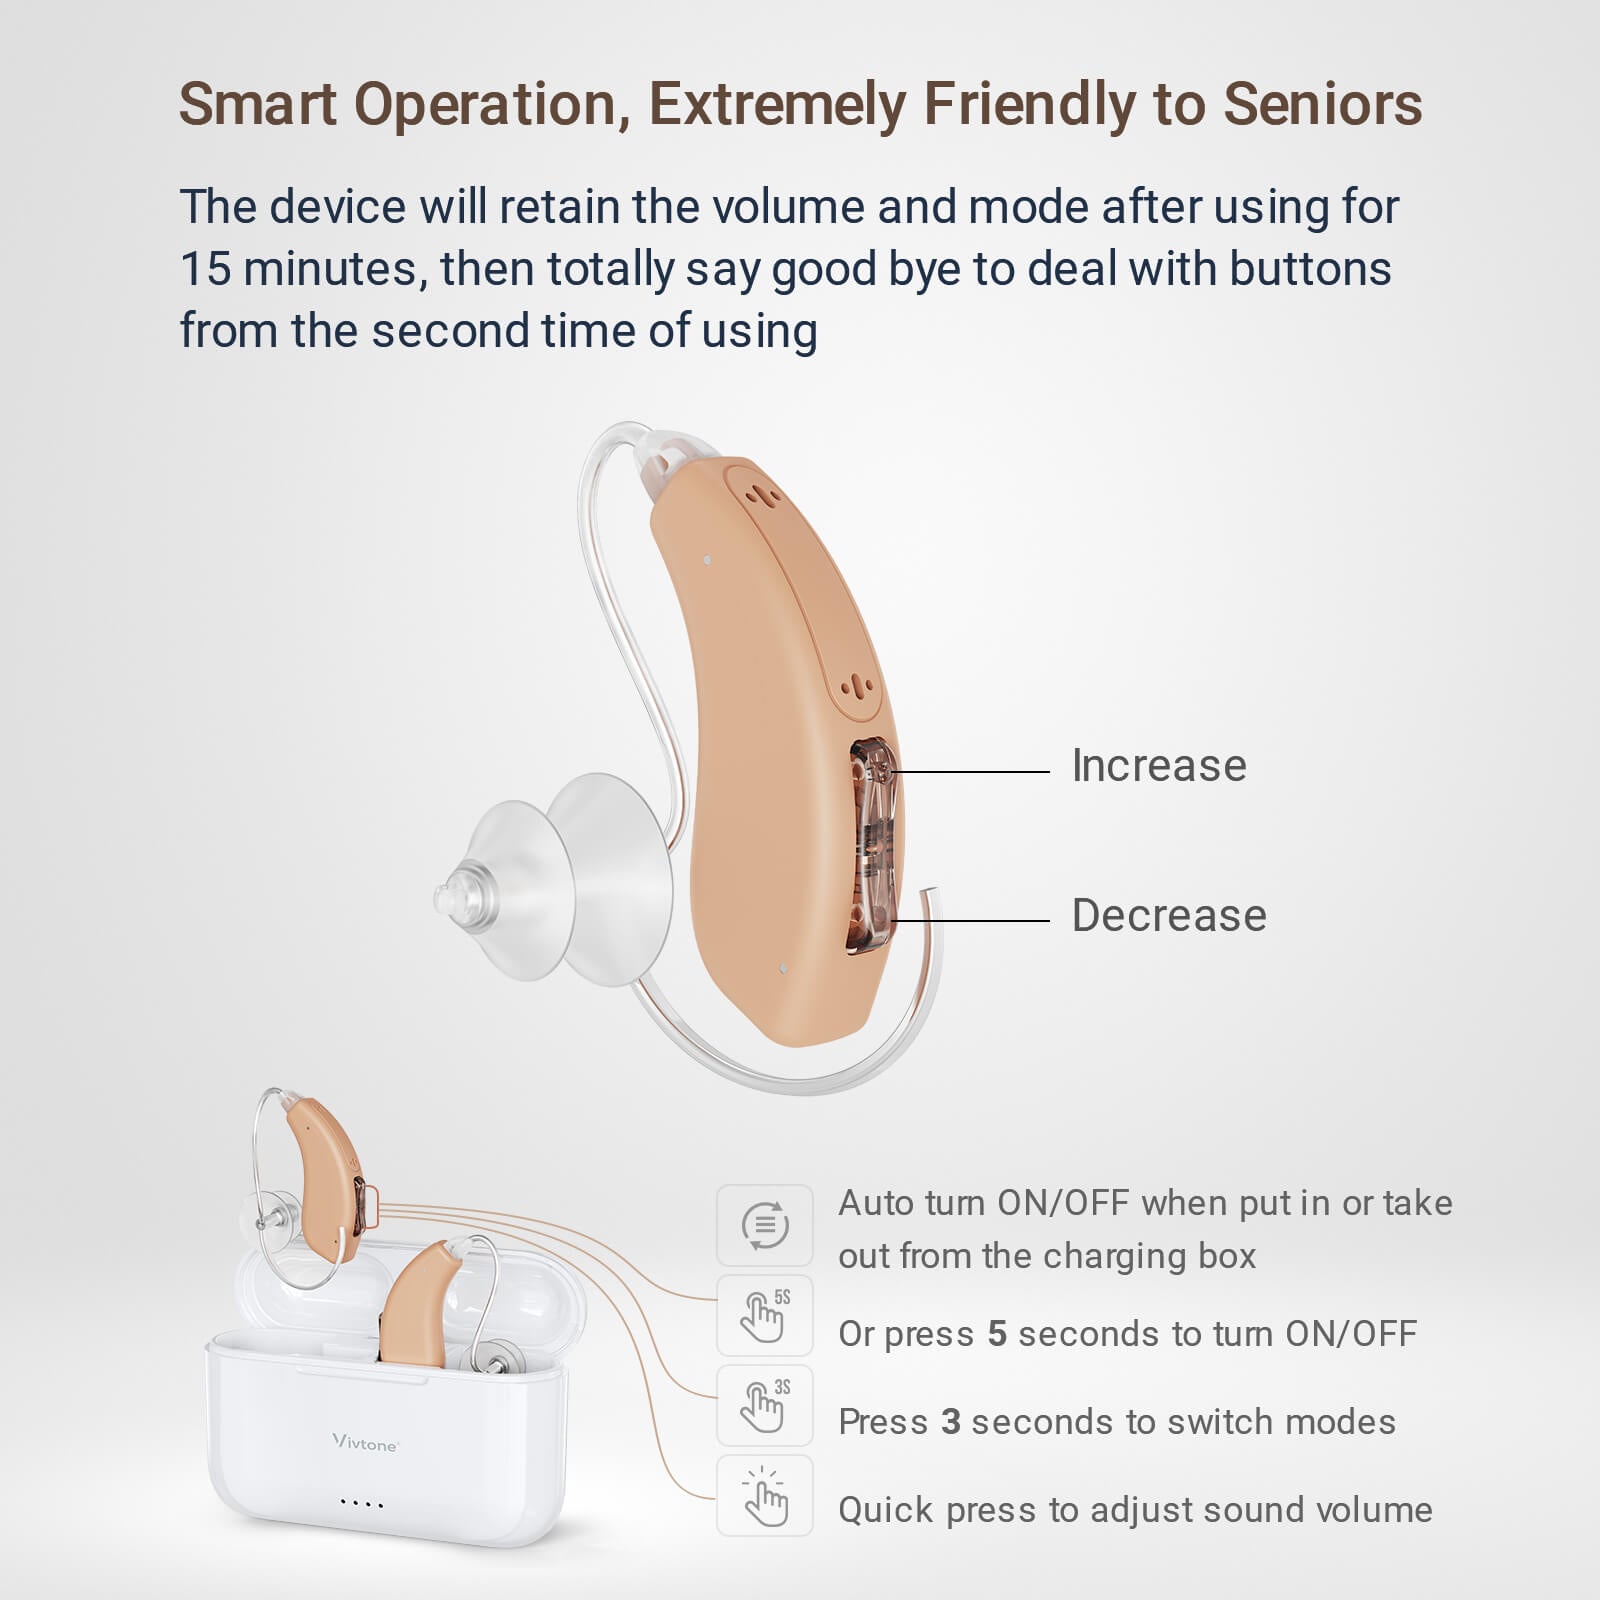 Experience Invisible Comfort: 2023's Best Behind-the-Ear Hearing Aid Technology-Vivtone Lucid508h